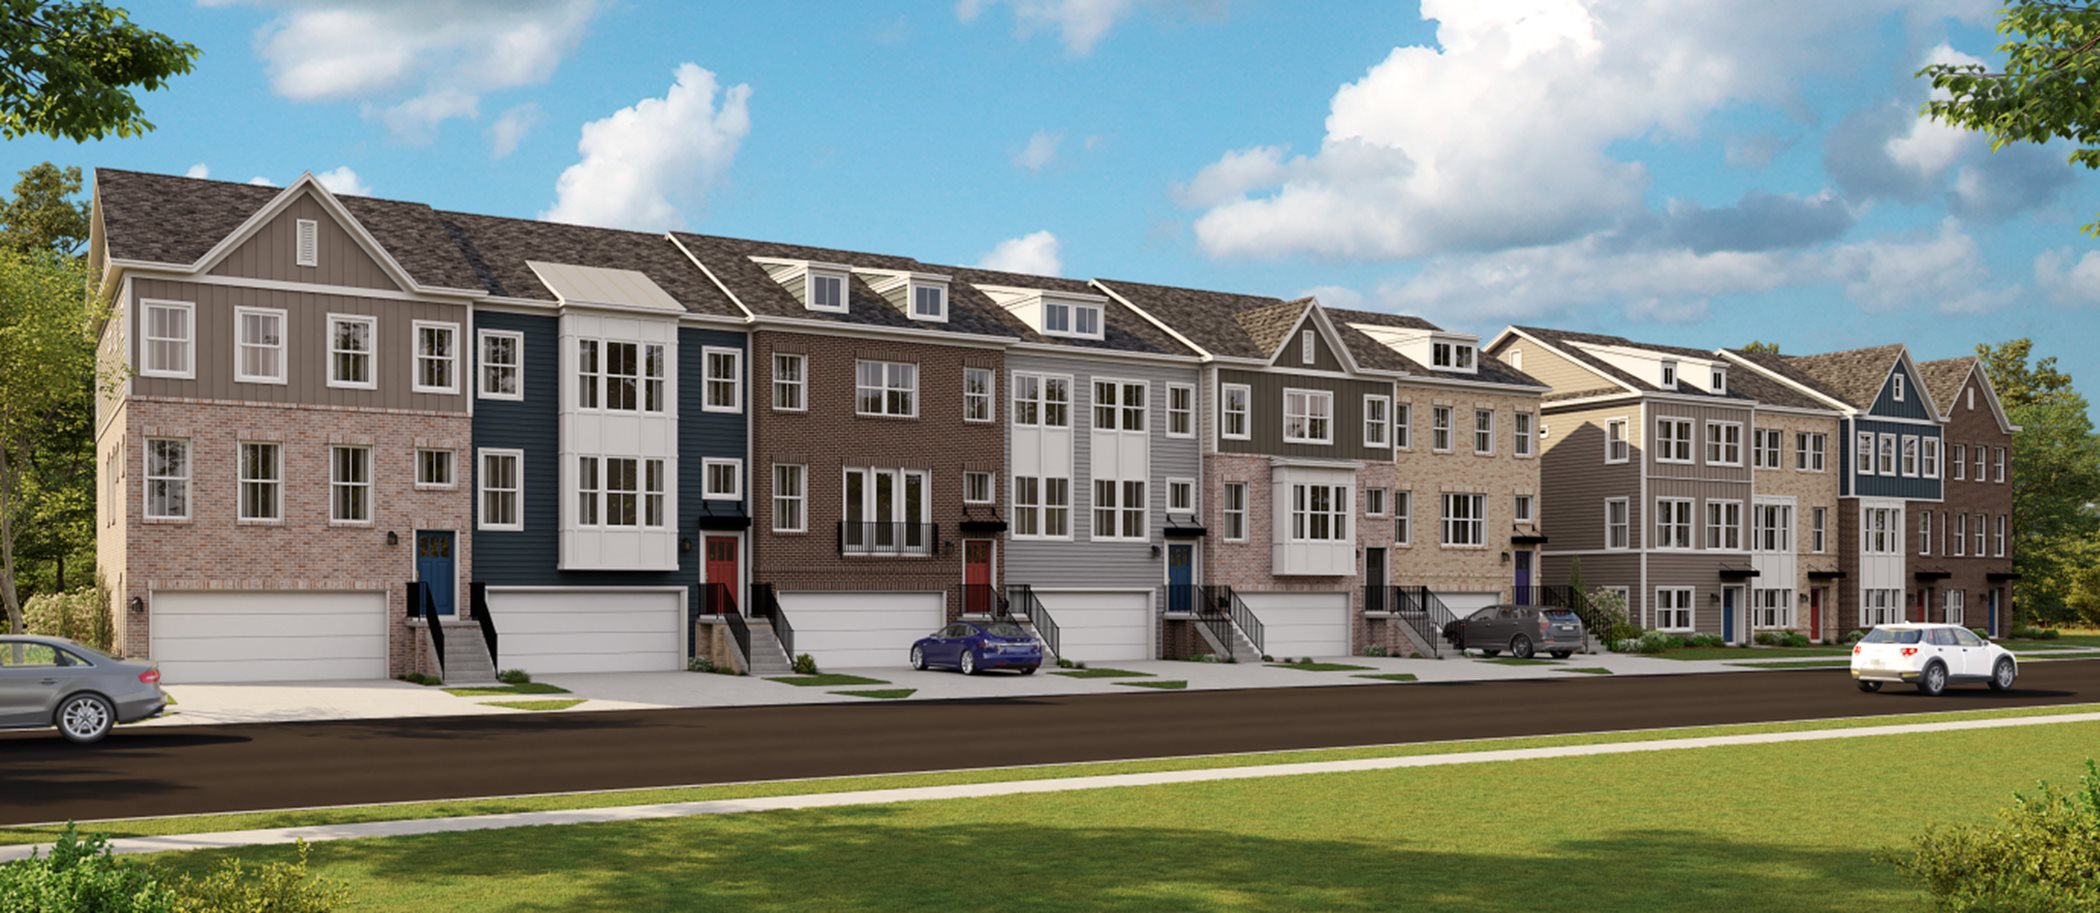 Townhomes at Bryans Village streetscape